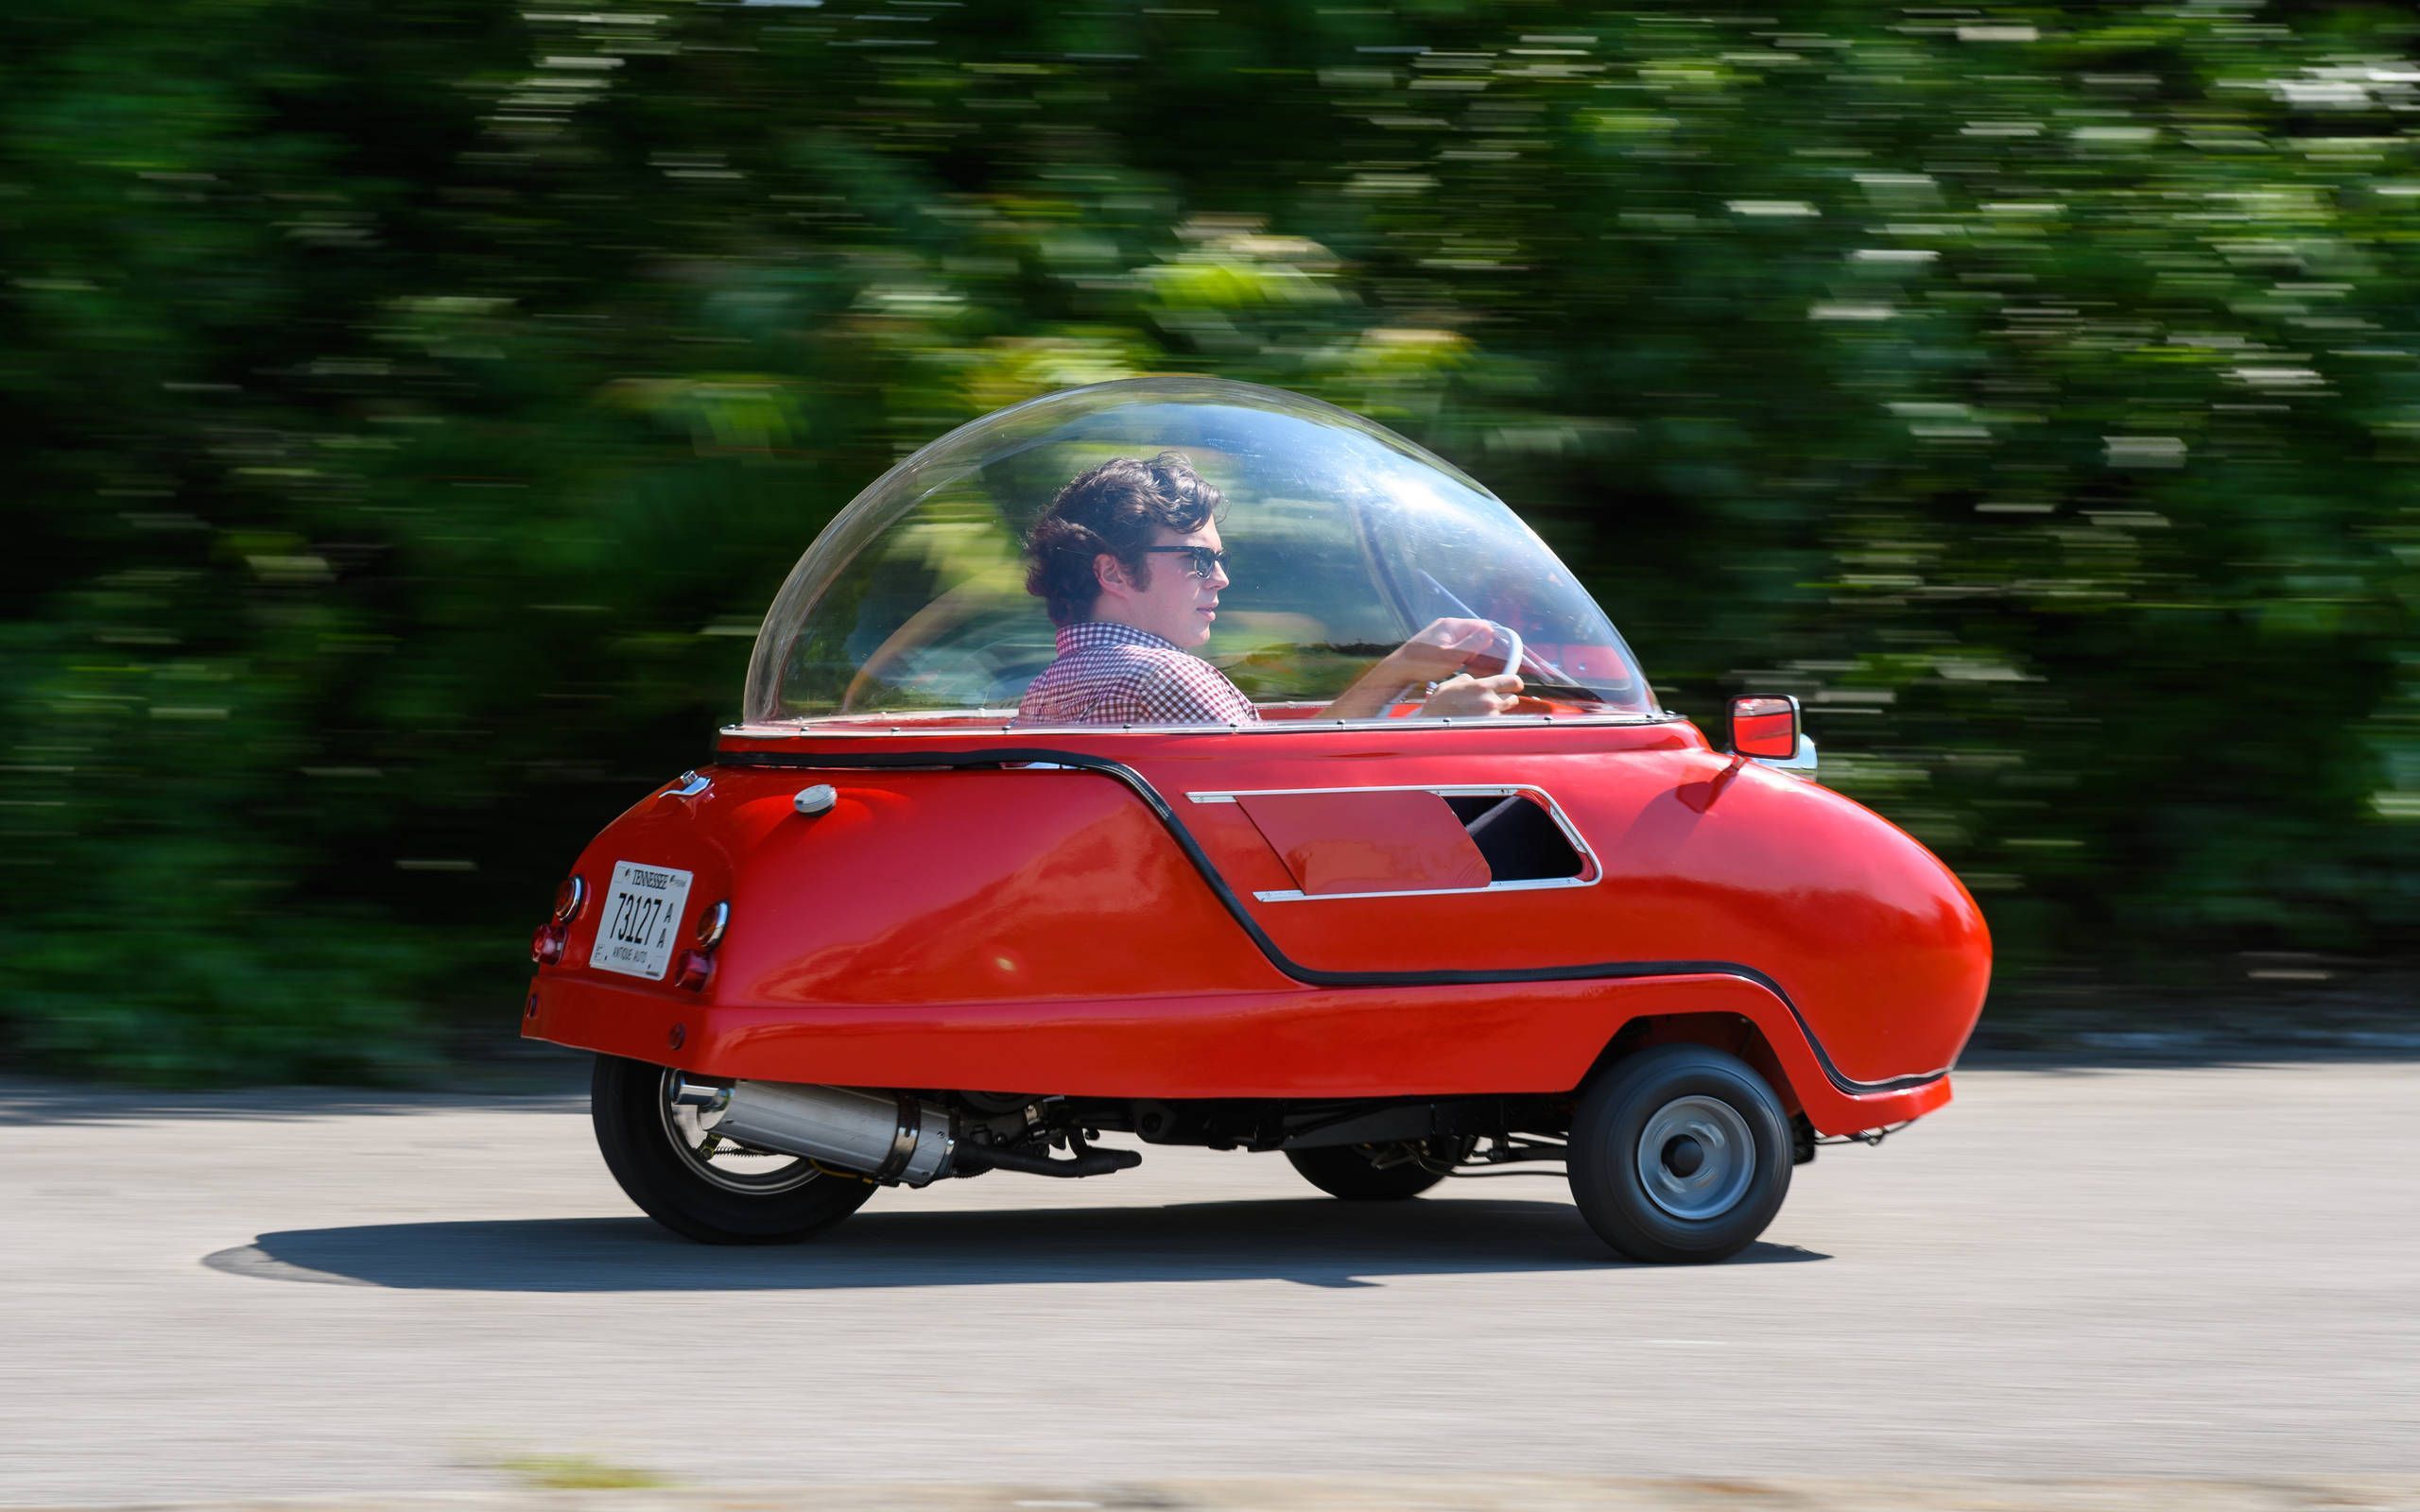 Microcars are the perfect antidote to automotive snobbery, and we